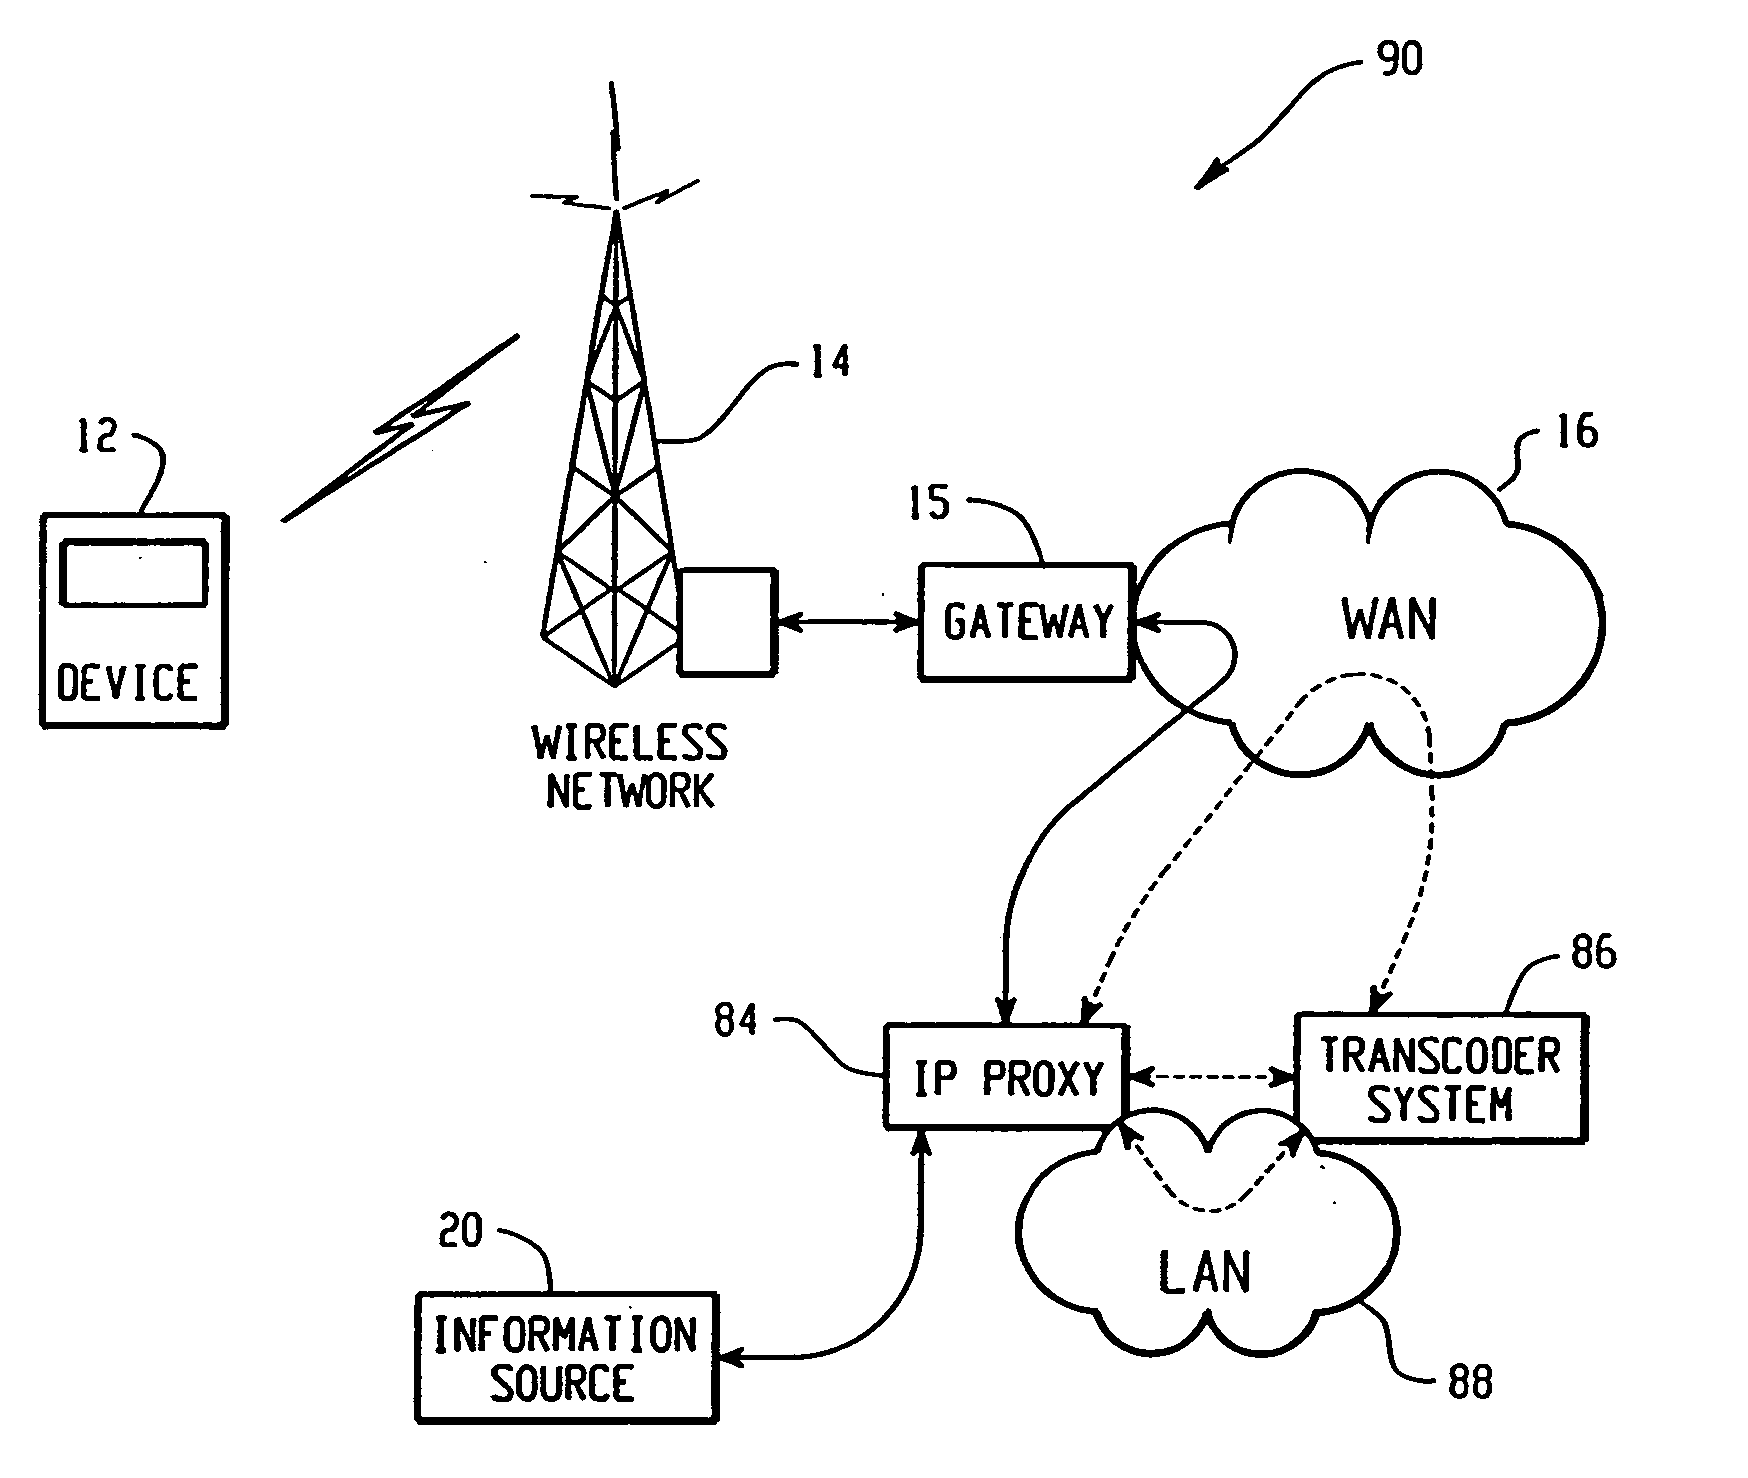 System and method for providing remote data access for a mobile communication device